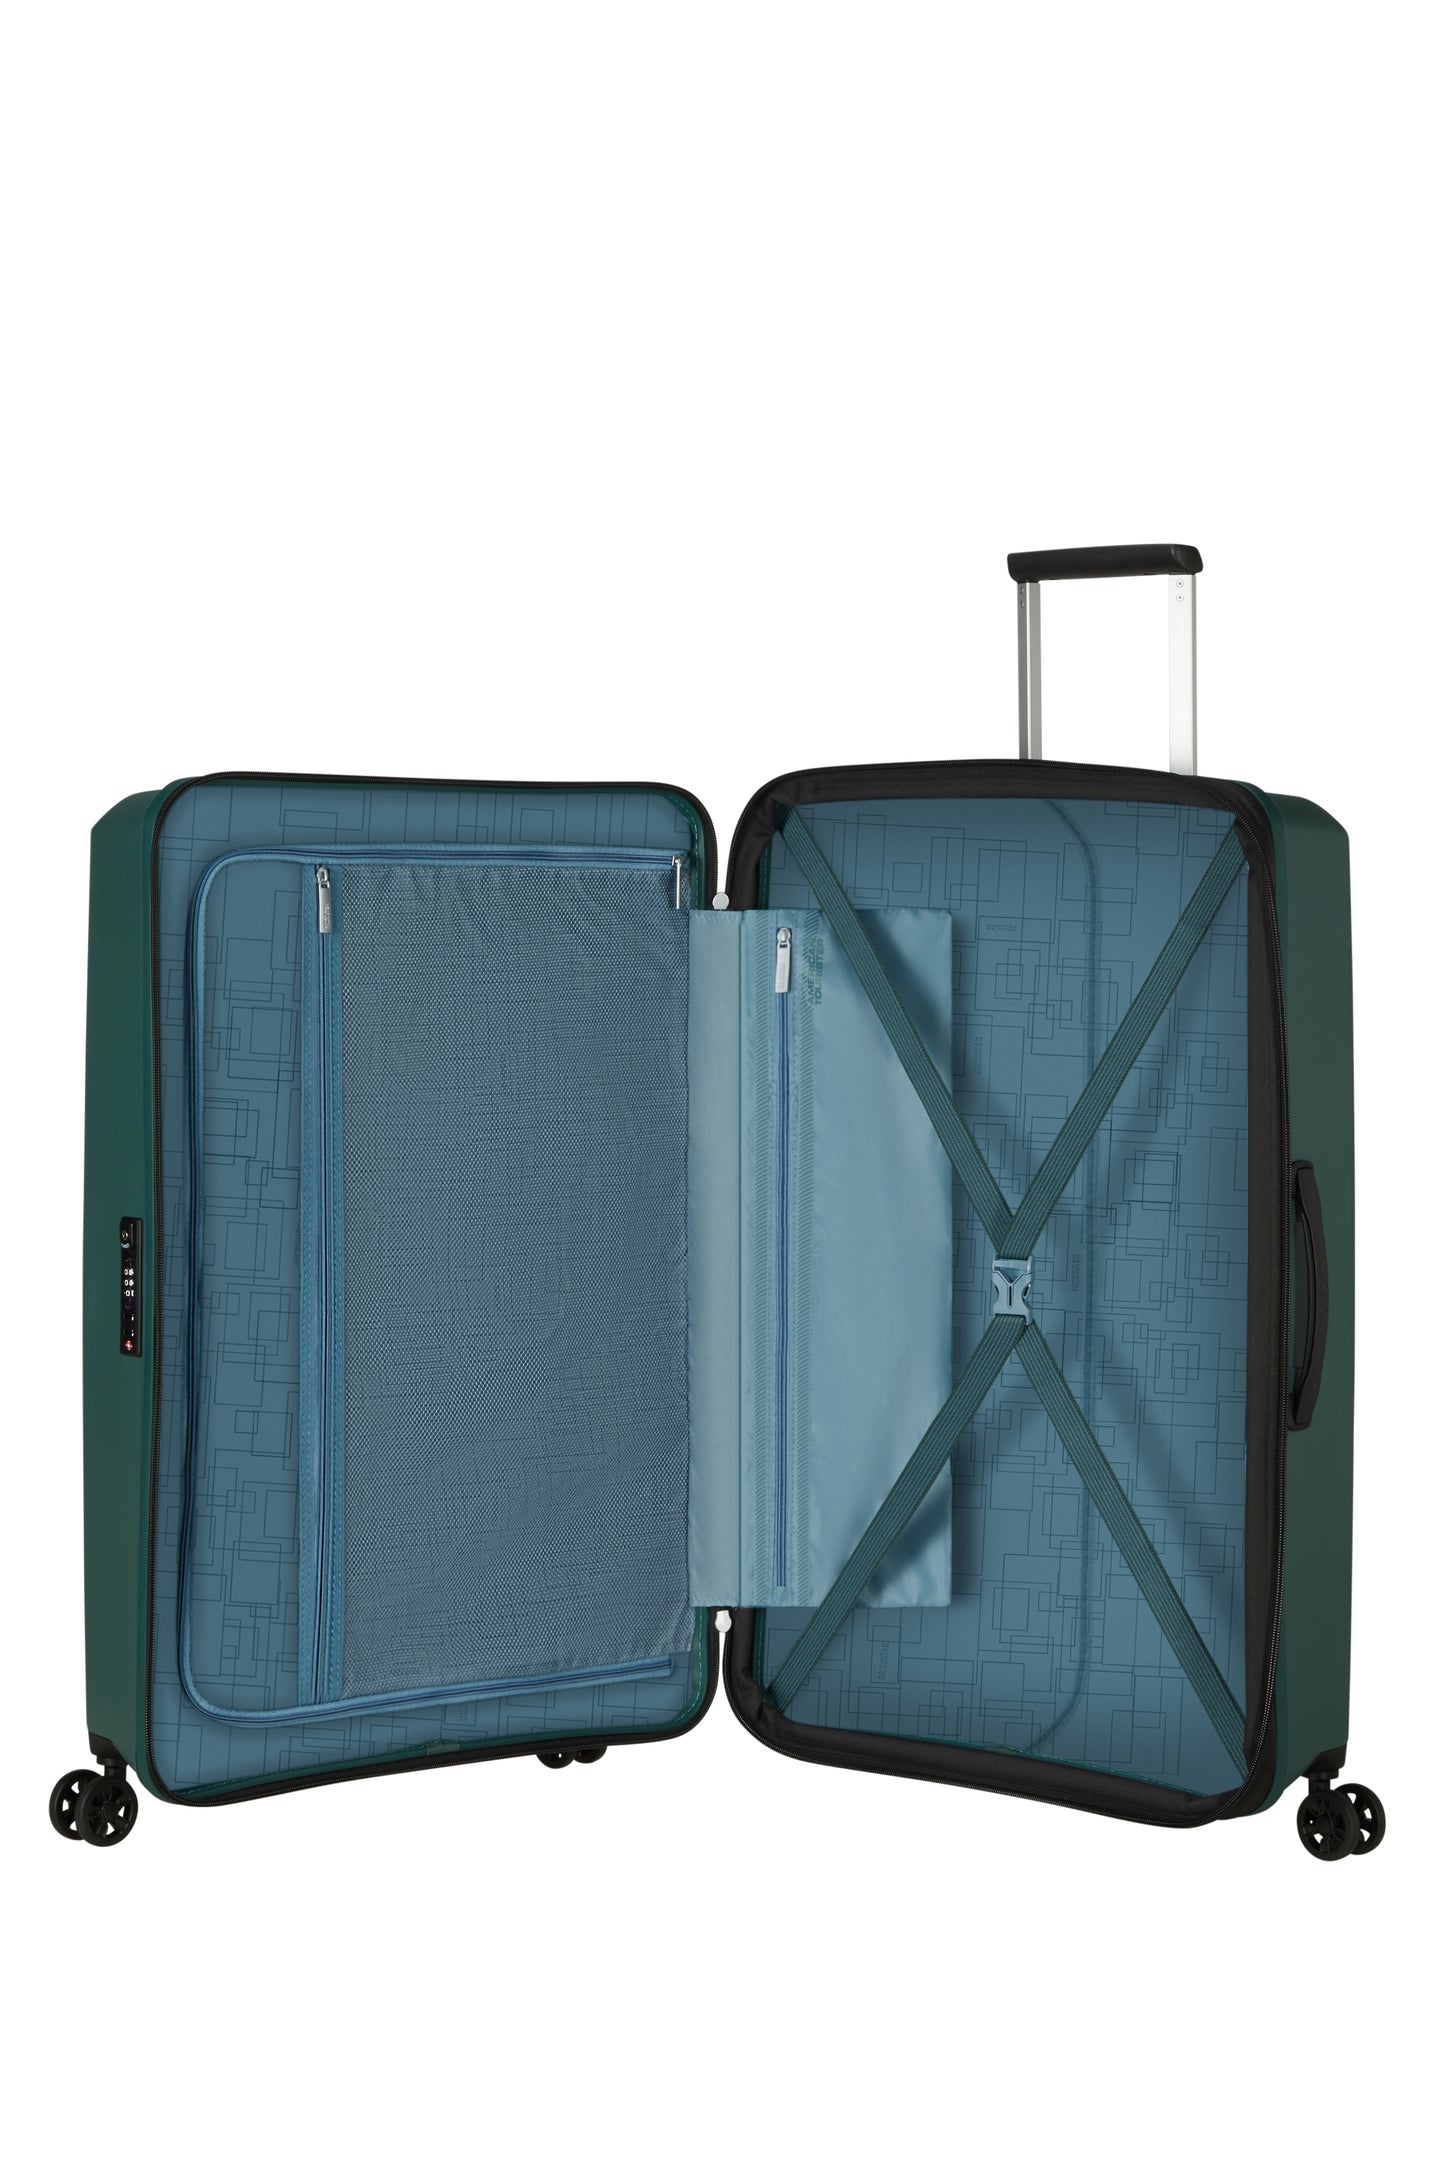 American Tourister AEROSTEP spinner 77 exp  forest